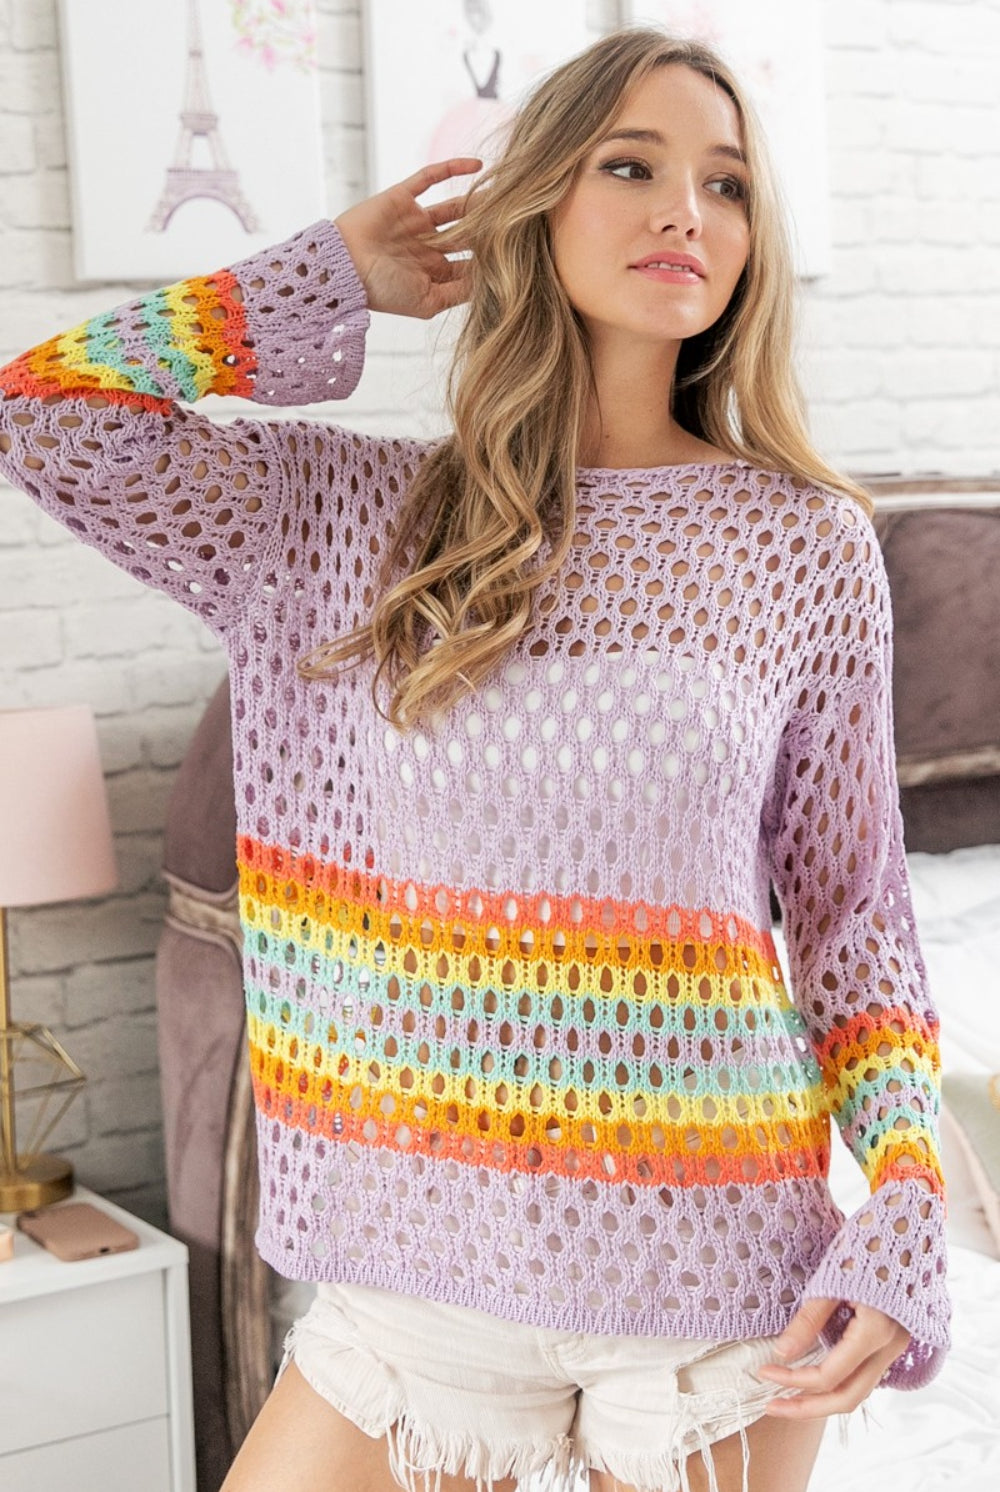 BiBi Rainbow Stripe Hollow Out Cover Up - GemThreads Boutique BiBi Rainbow Stripe Hollow Out Cover Up